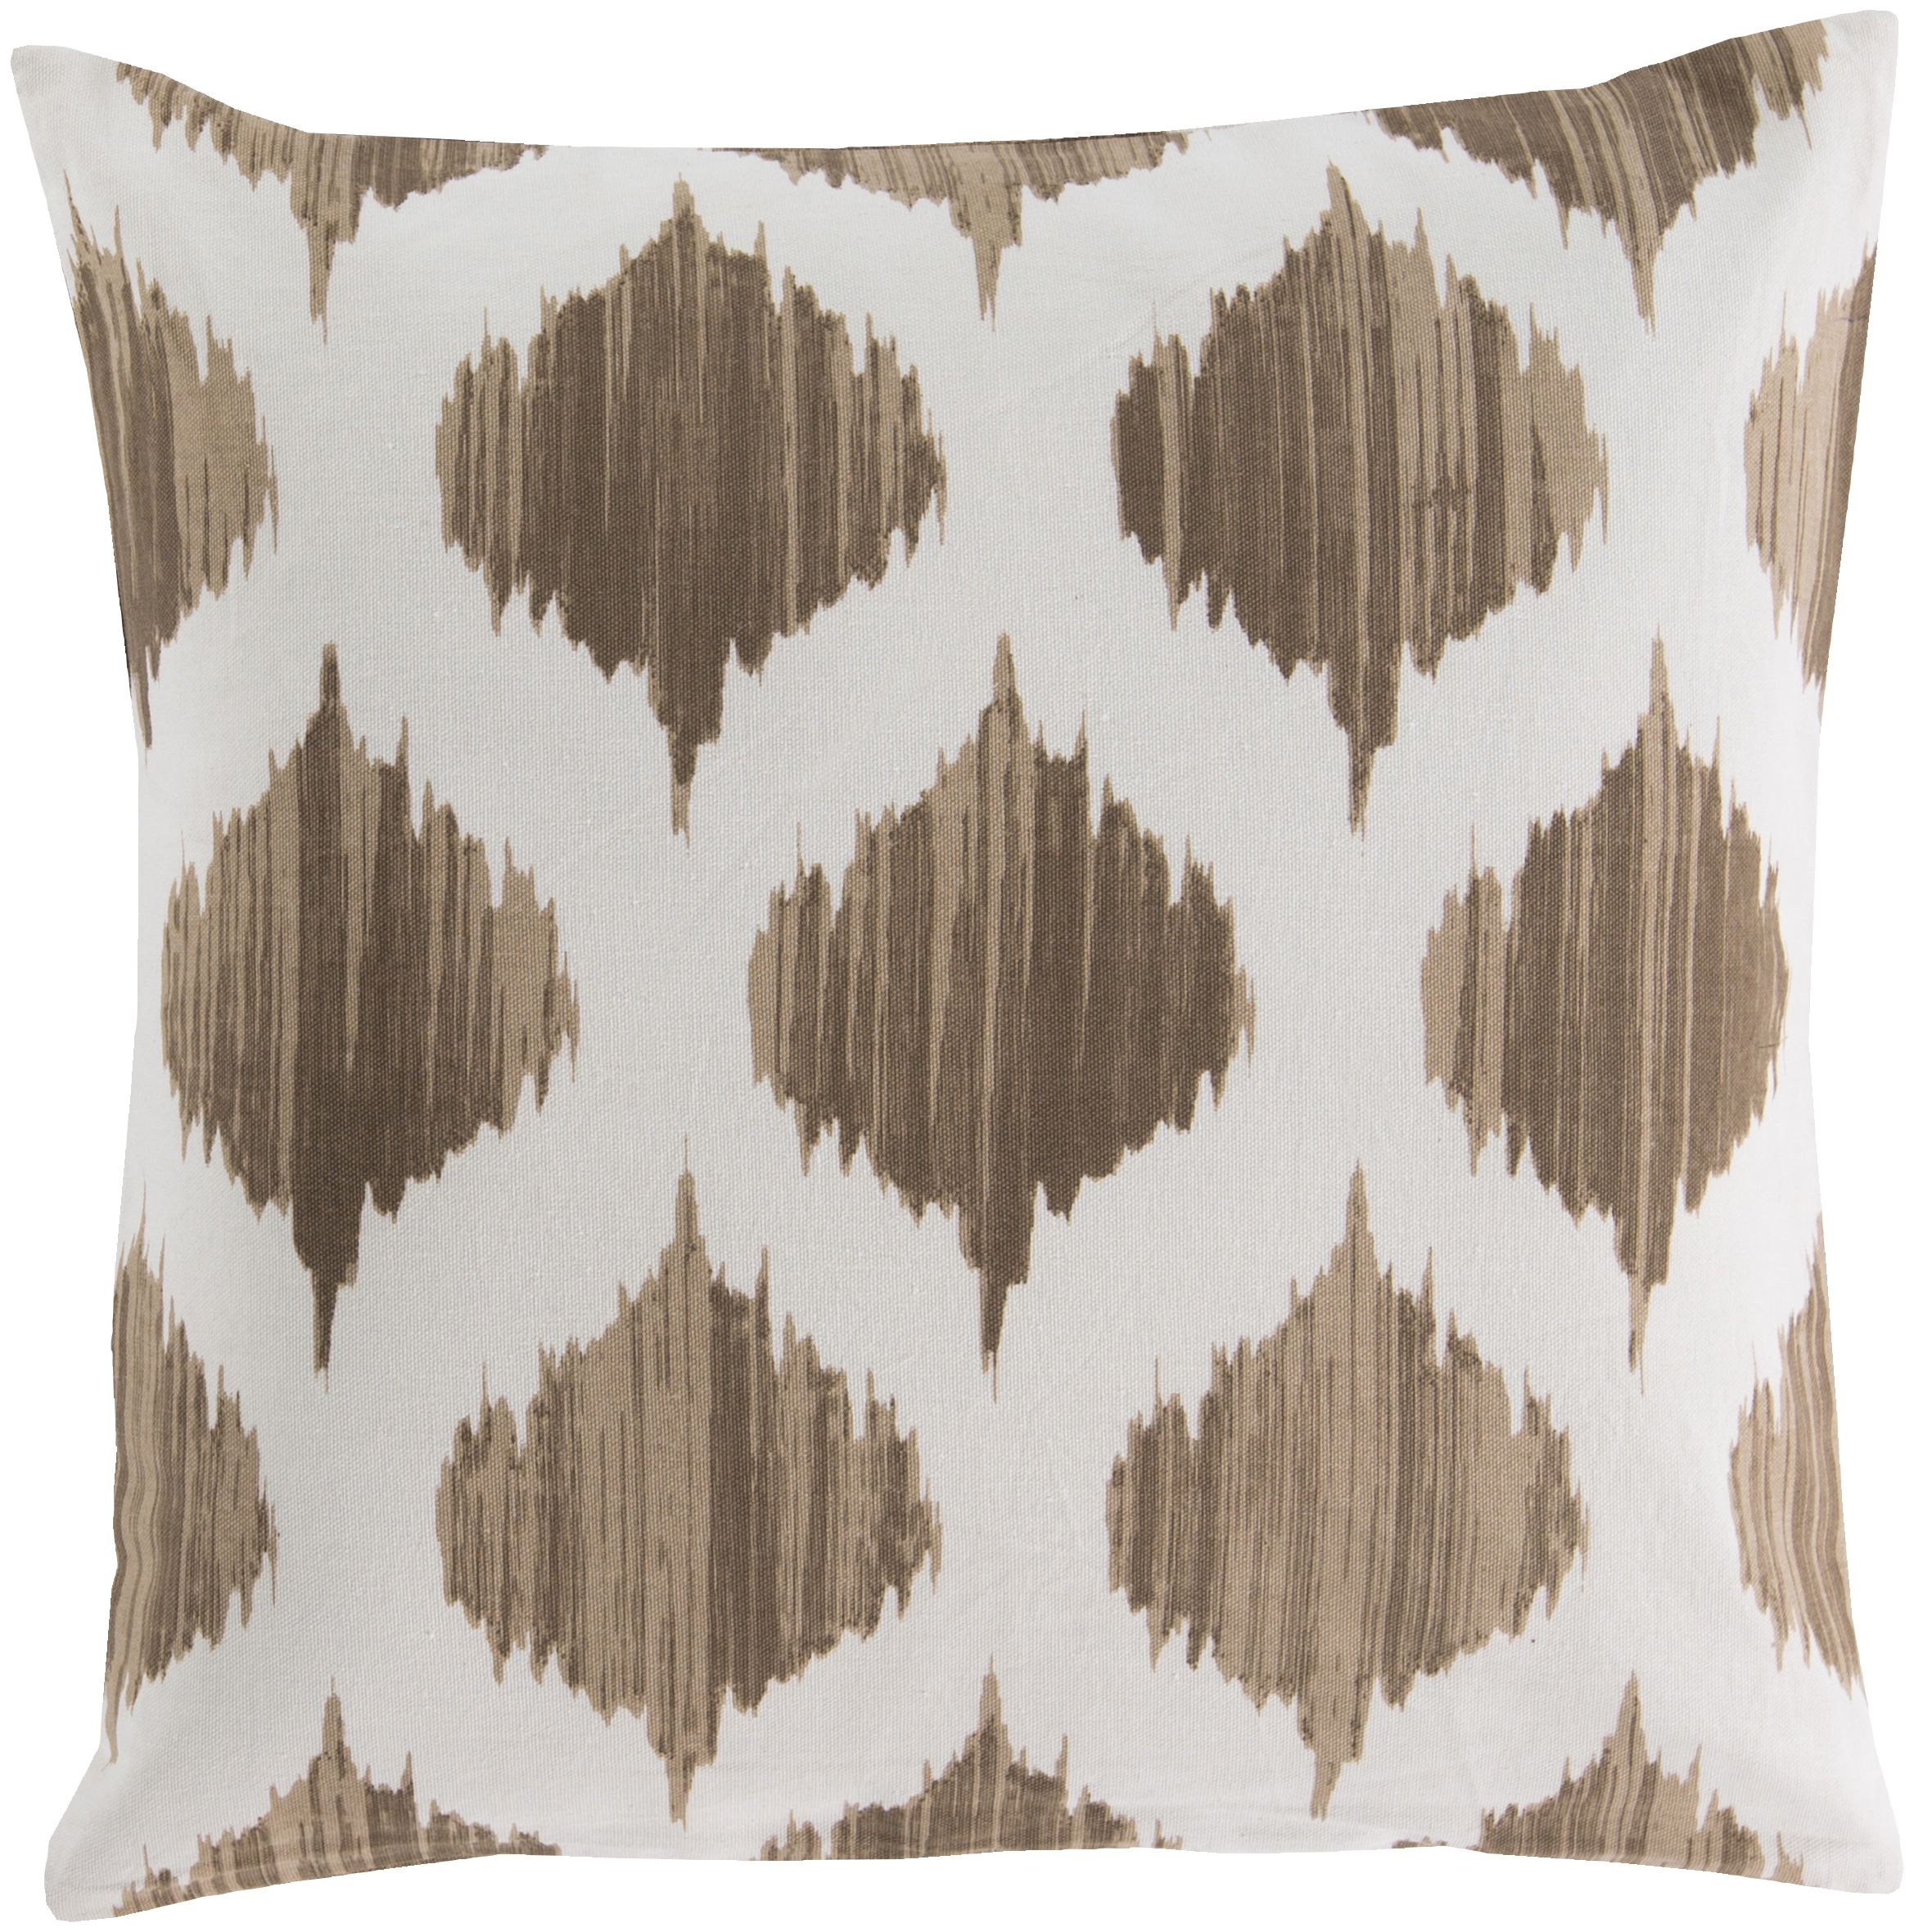 Ogee Throw Pillow, 18" x 18", pillow cover only - Image 0